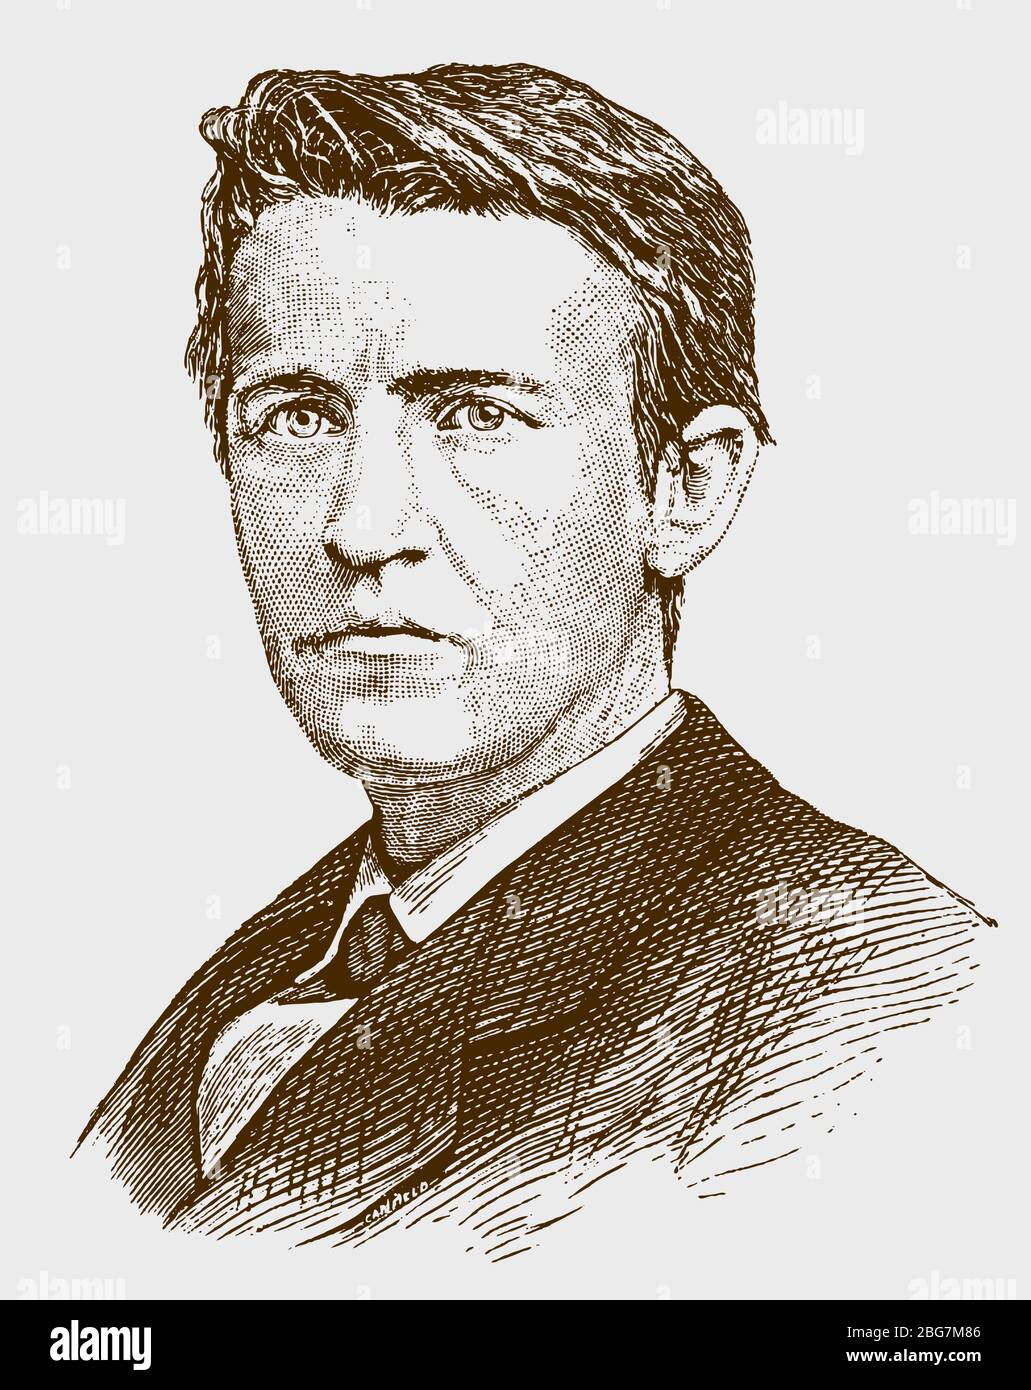 Historical portrait of young thomas alva edison the famous american inventor. lllustration after an engraving from the 19th century Stock Vector